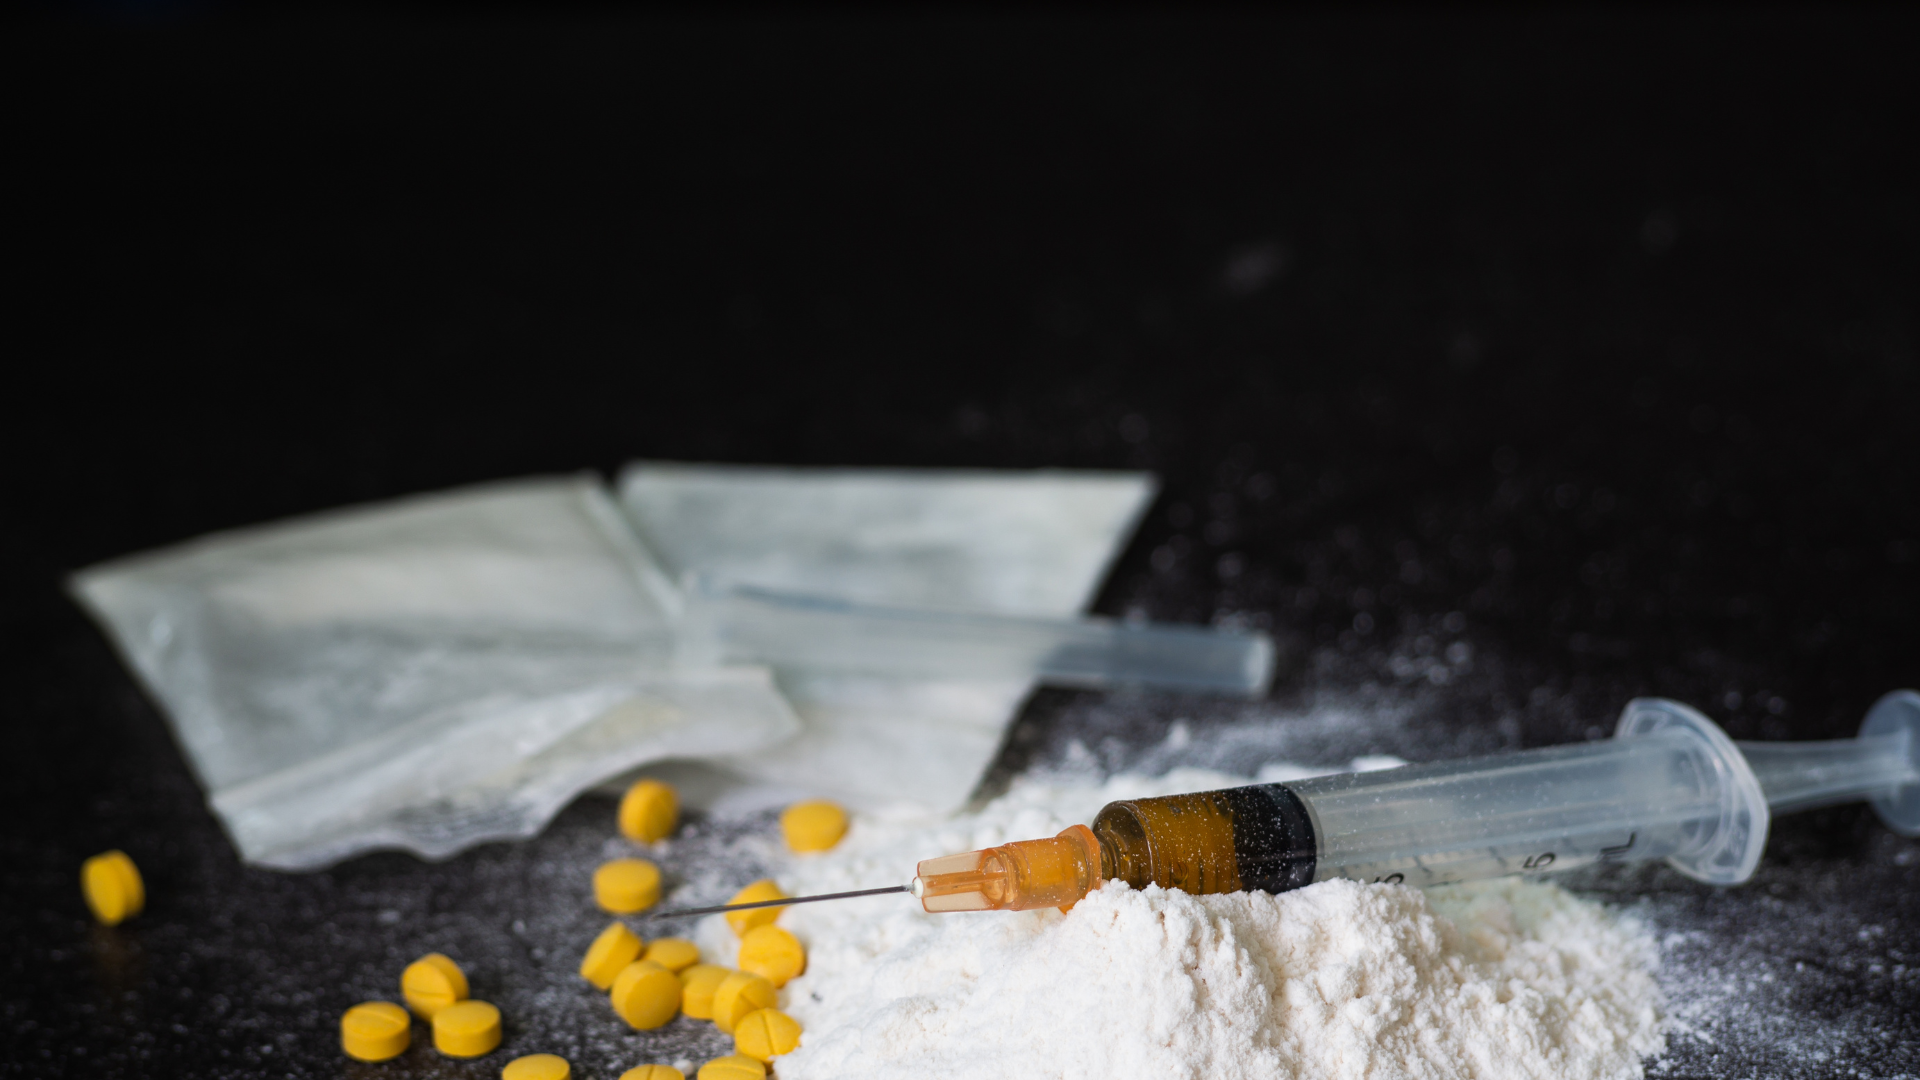 needle on top of white powder with yellow pills and small bags